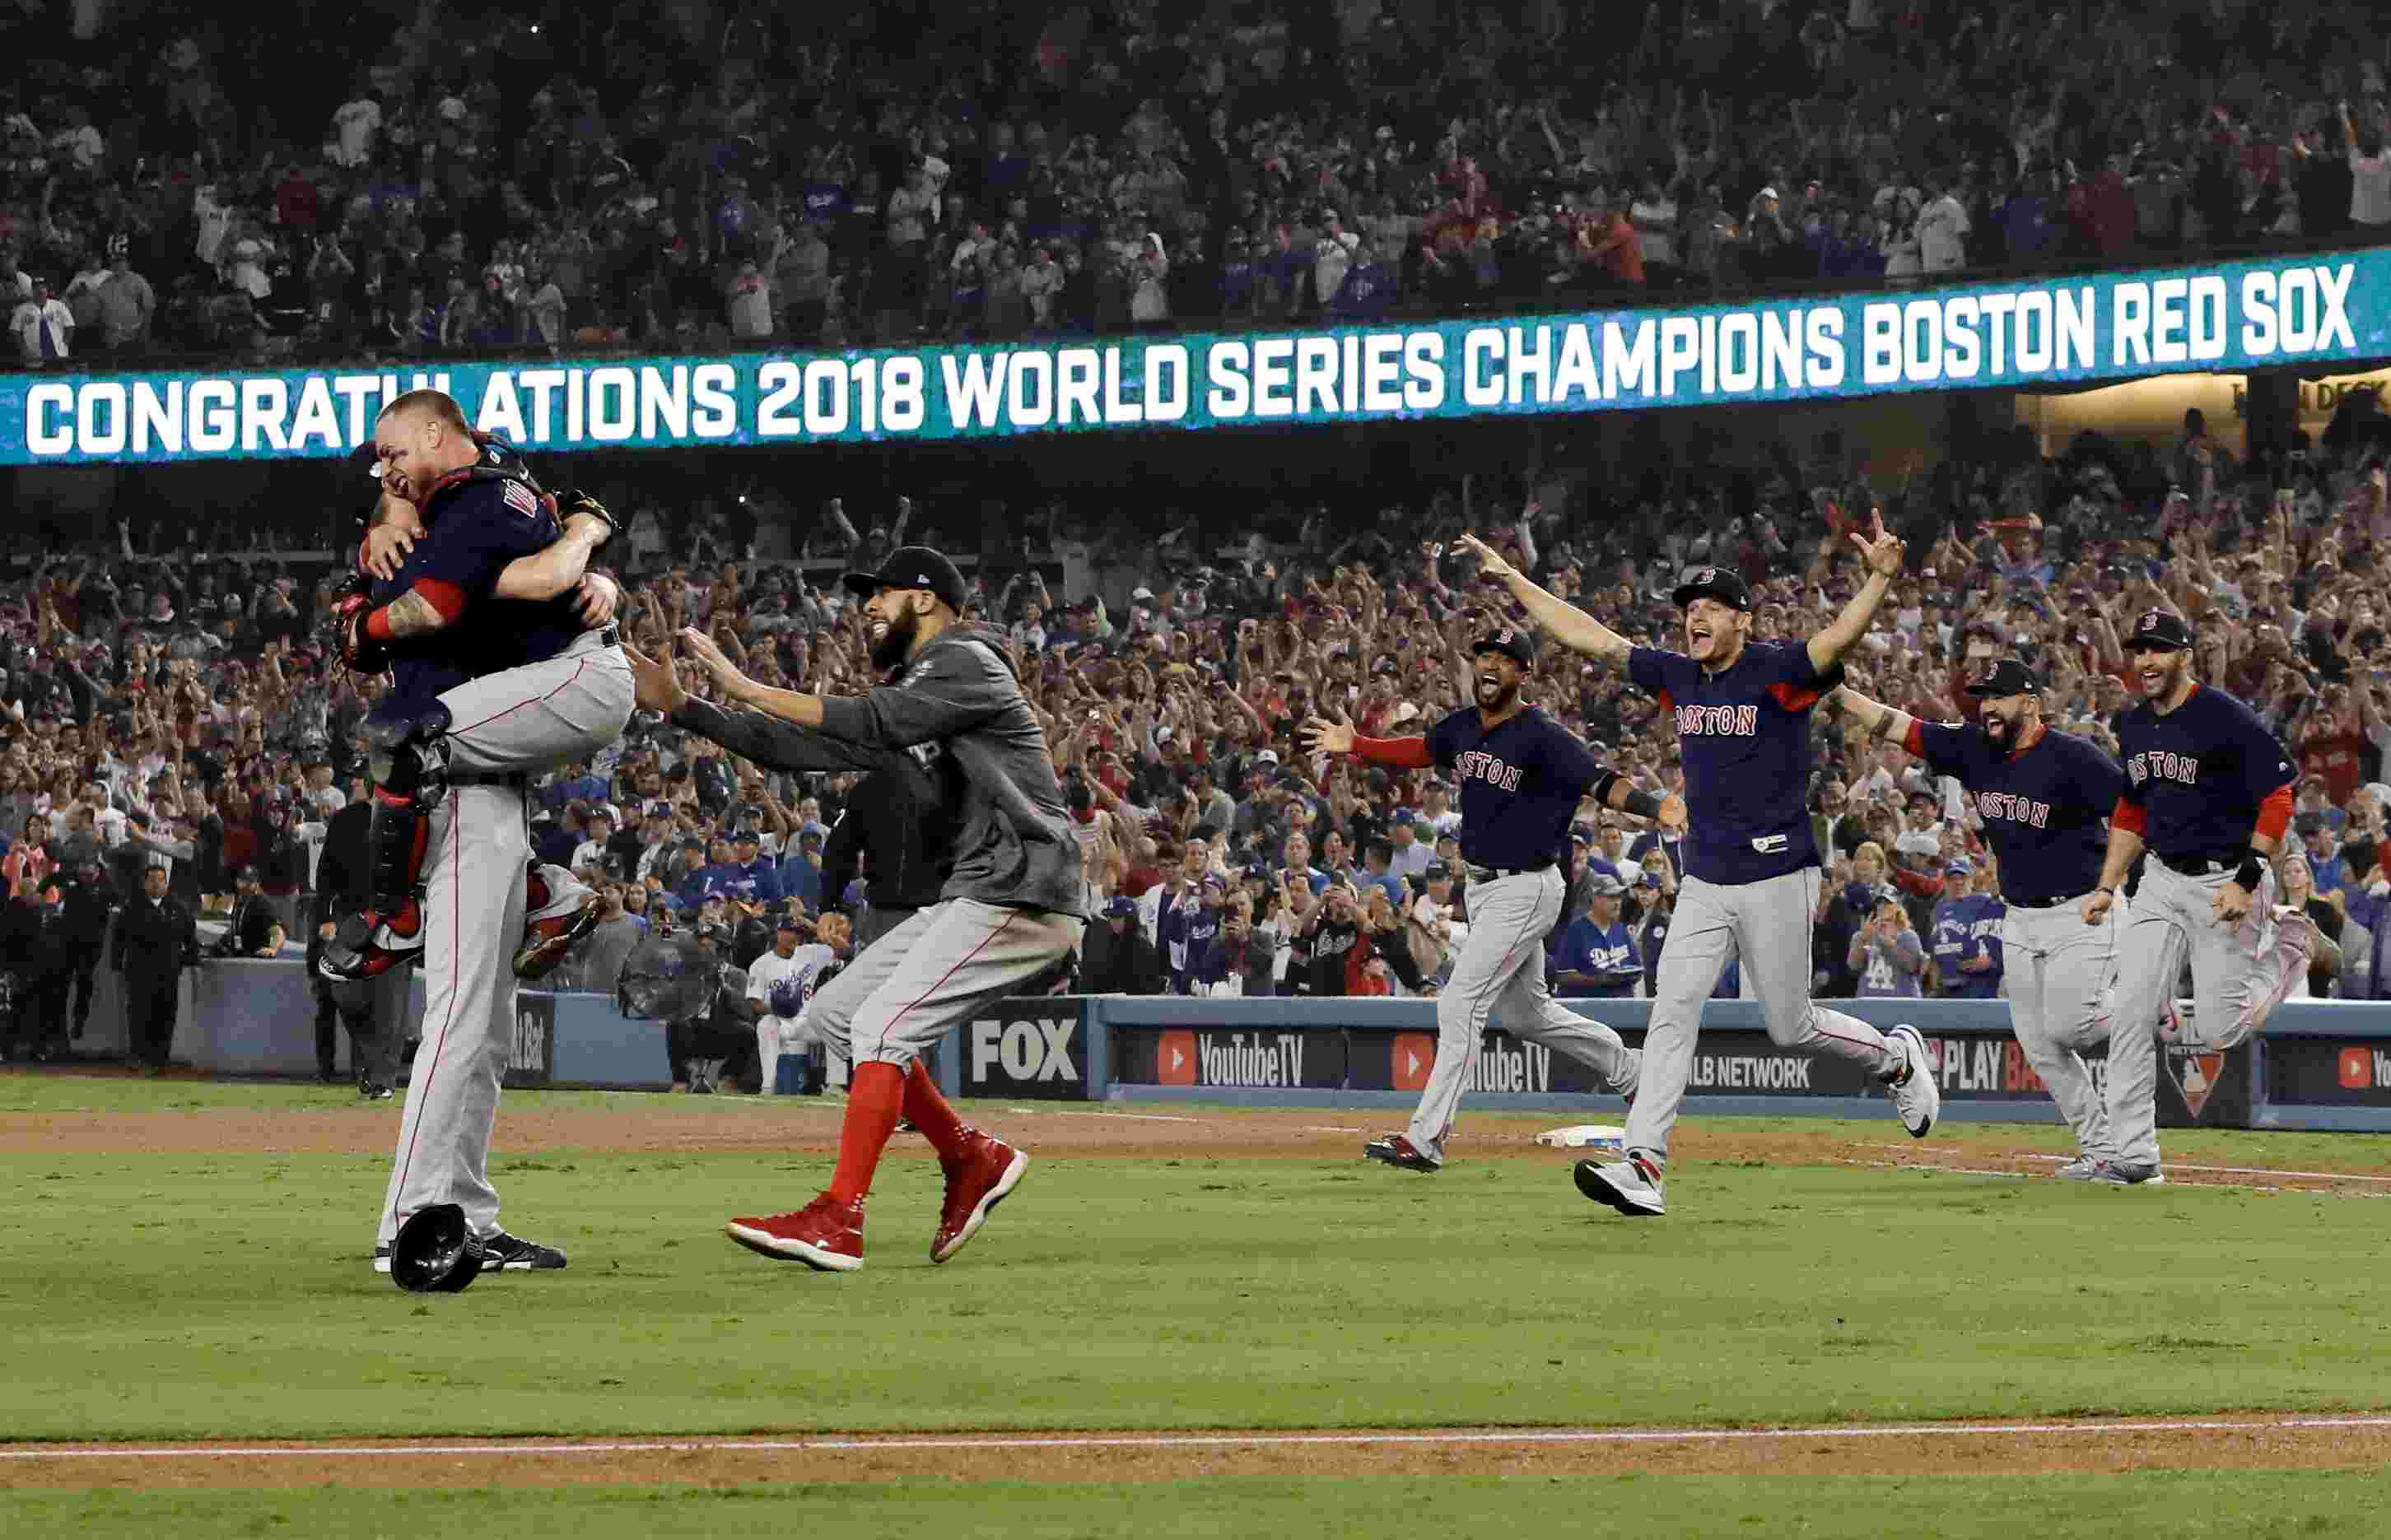  Dynasty! The 2018 Boston Red Sox are the best team ever, that’s simply a fact!